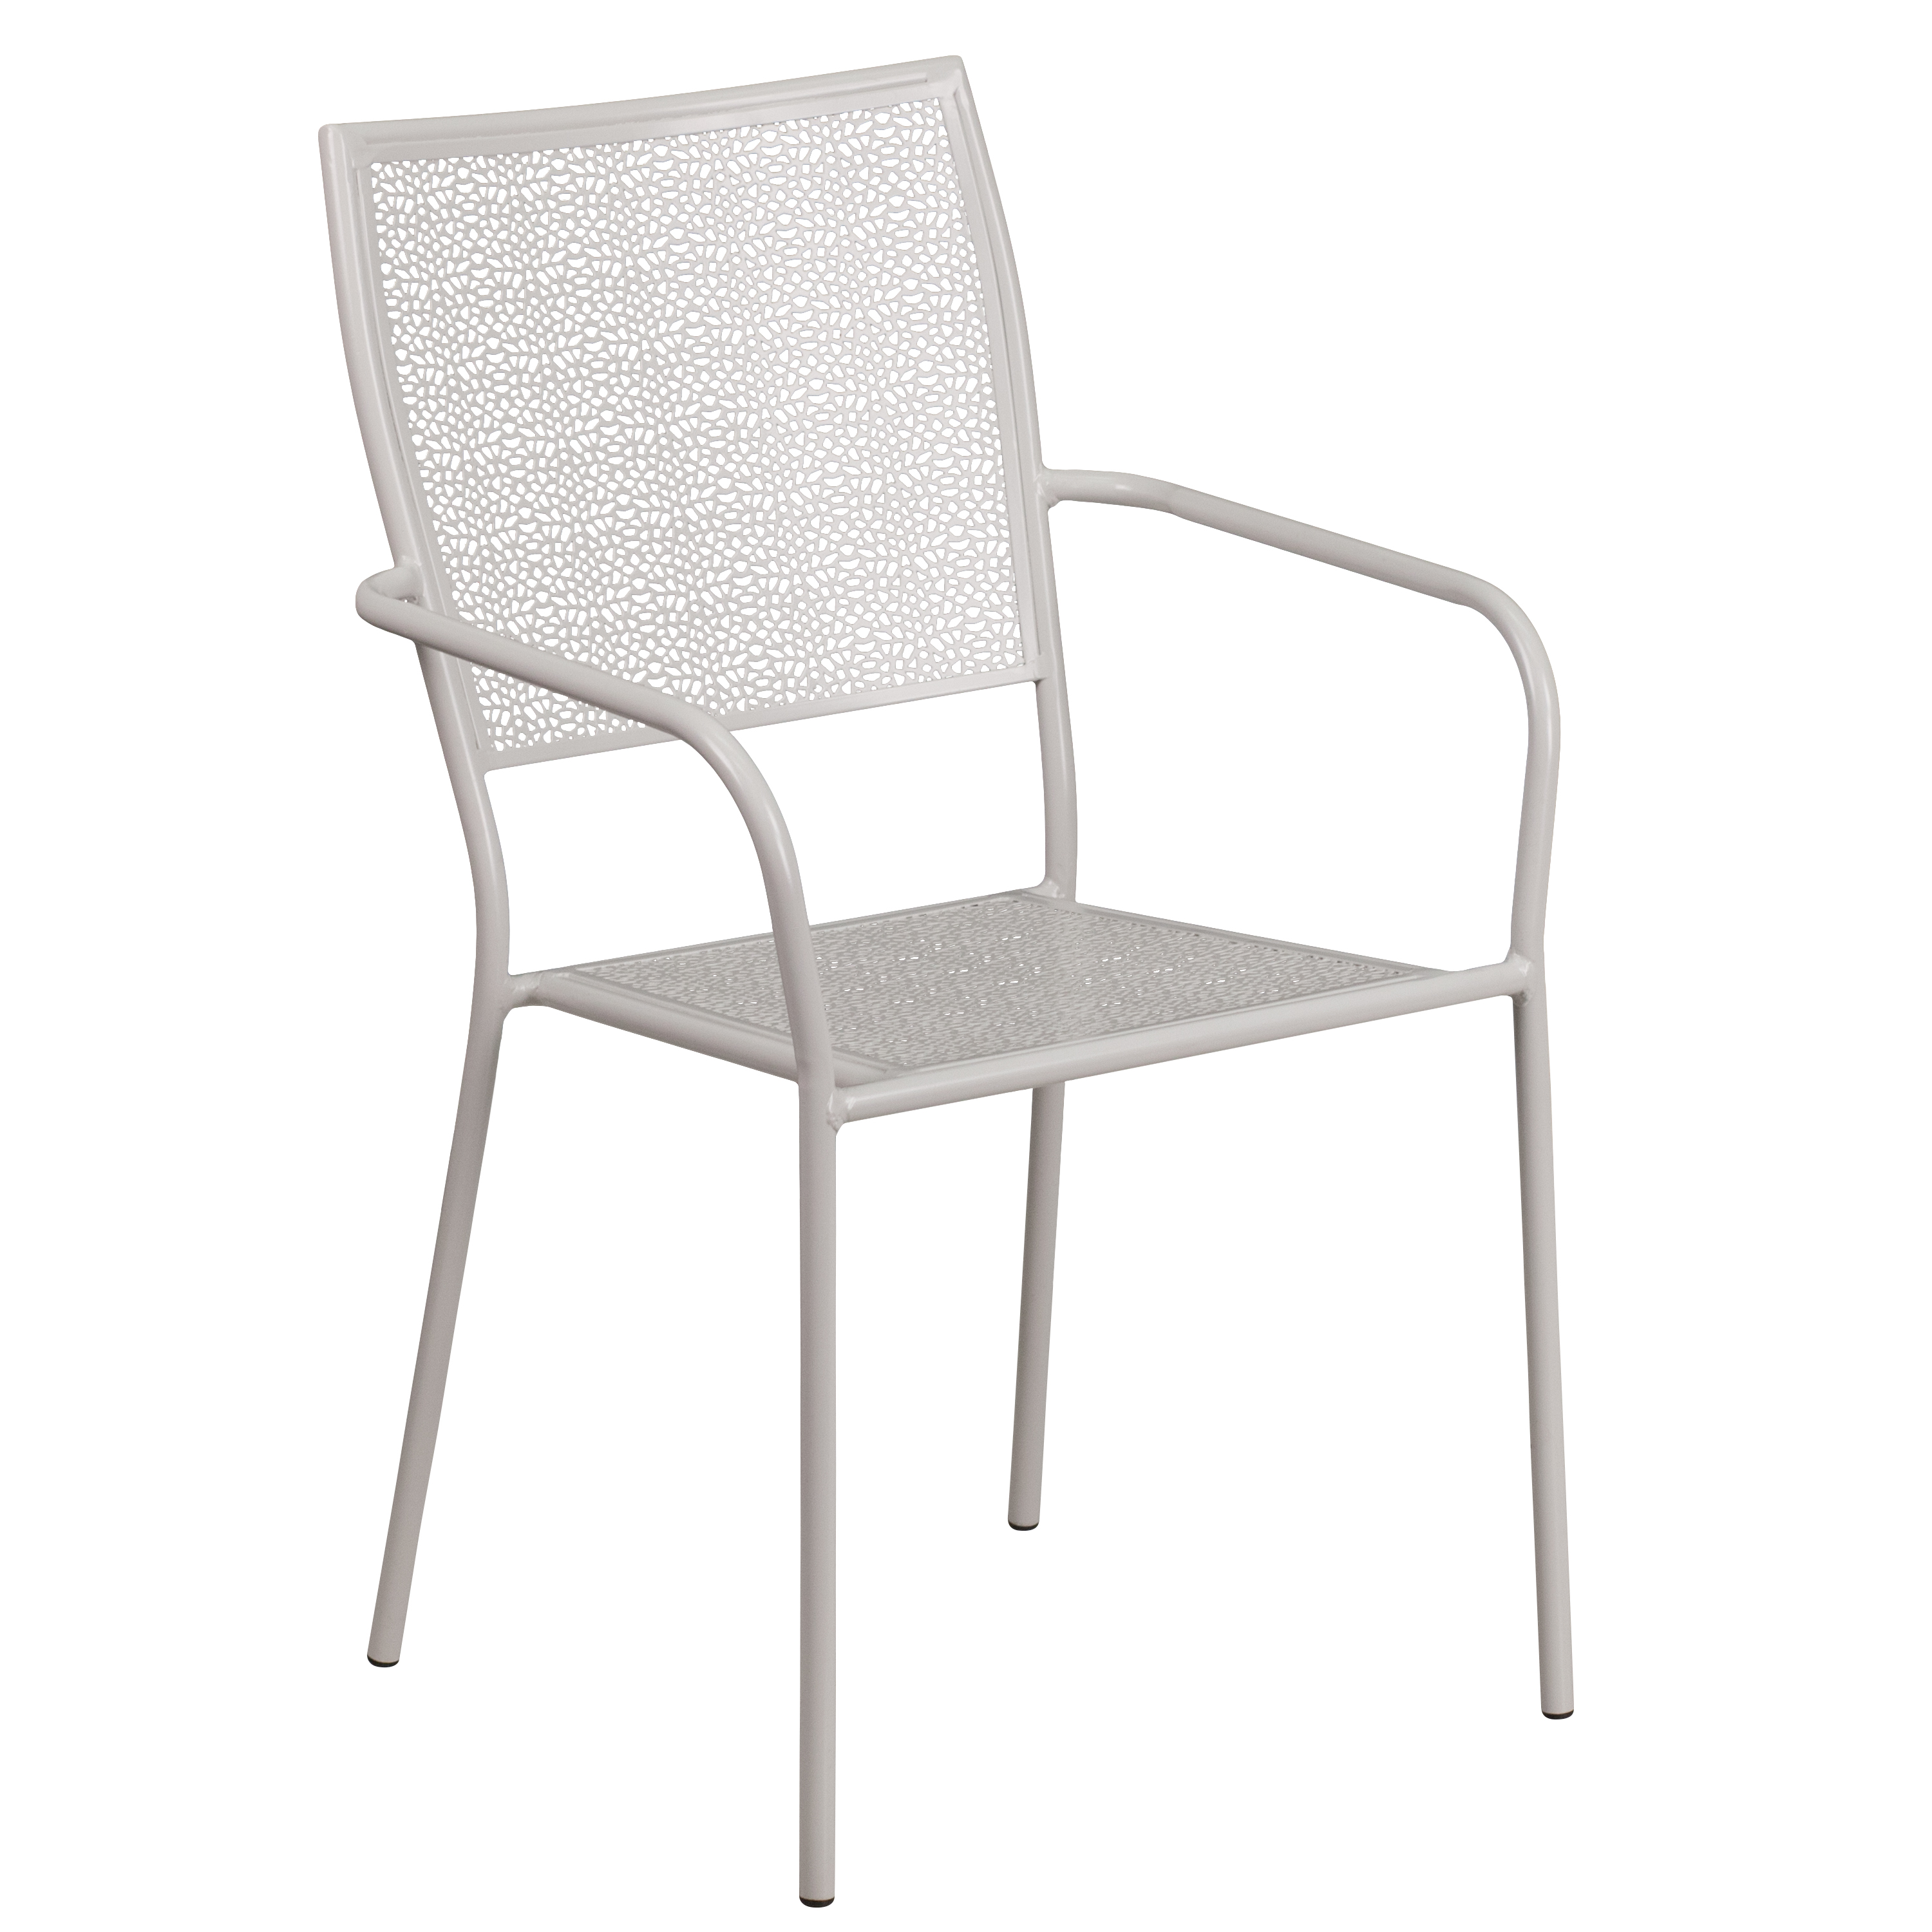 Flash Furniture CO-2-SIL-GG Light Gray Indoor/Outdoor Steel Patio Arm Chair with Square Back